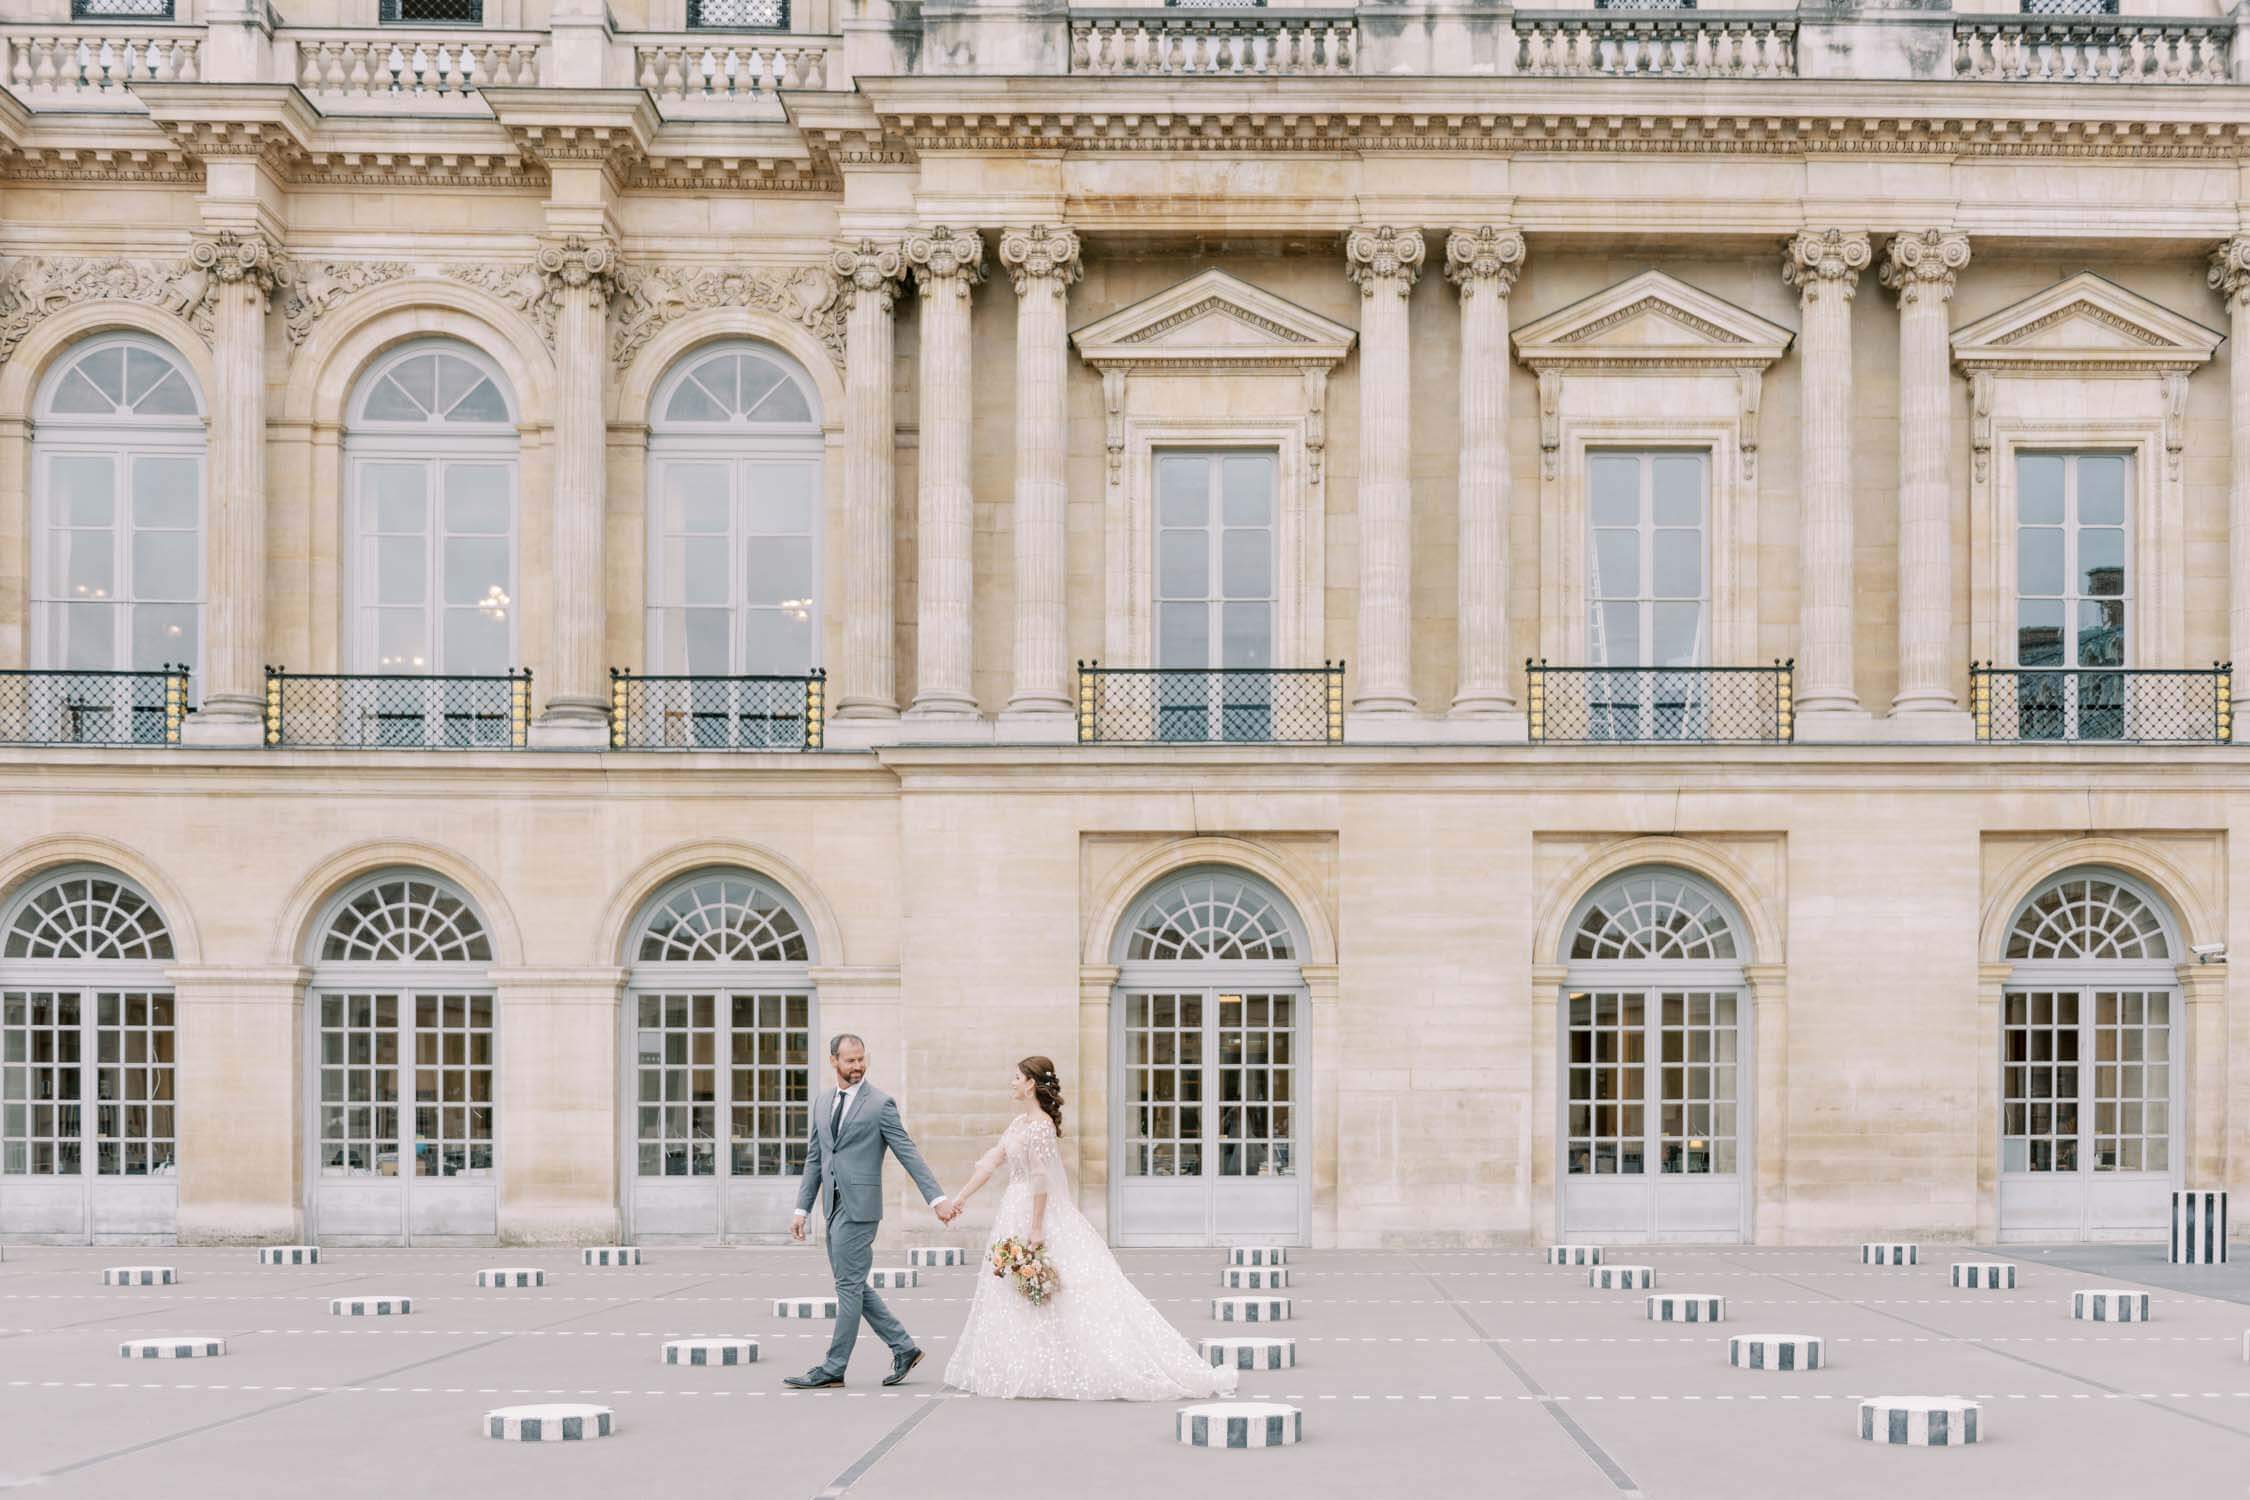 A bride and groom walk at the Palais Royal and are photographed by a Paris wedding photographer